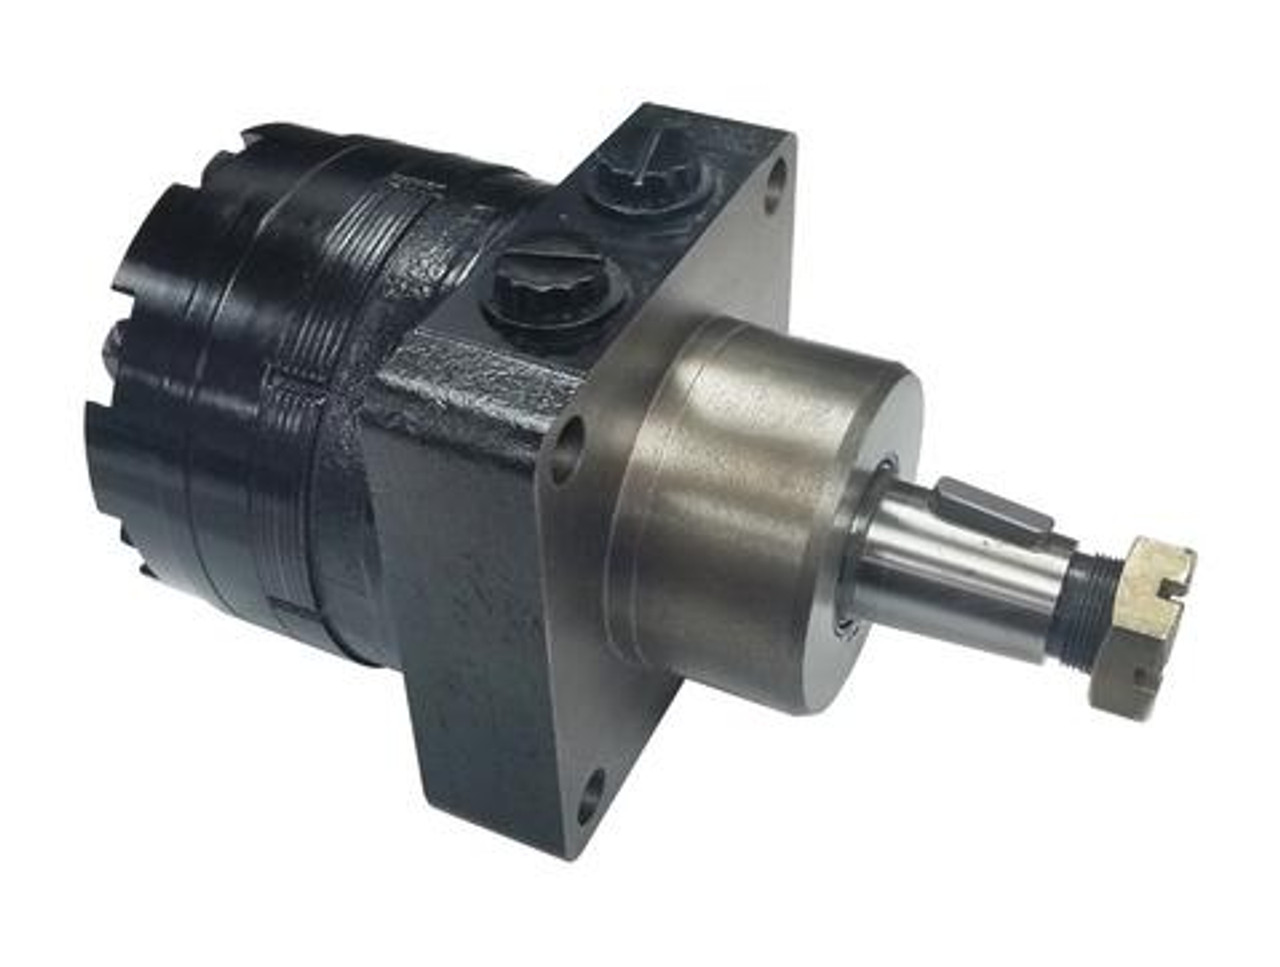 BMER-2-540-WS-T4-S Hydraulic motor low speed high torque 32.94 cubic inch displacement  Dynamic Fluid Components